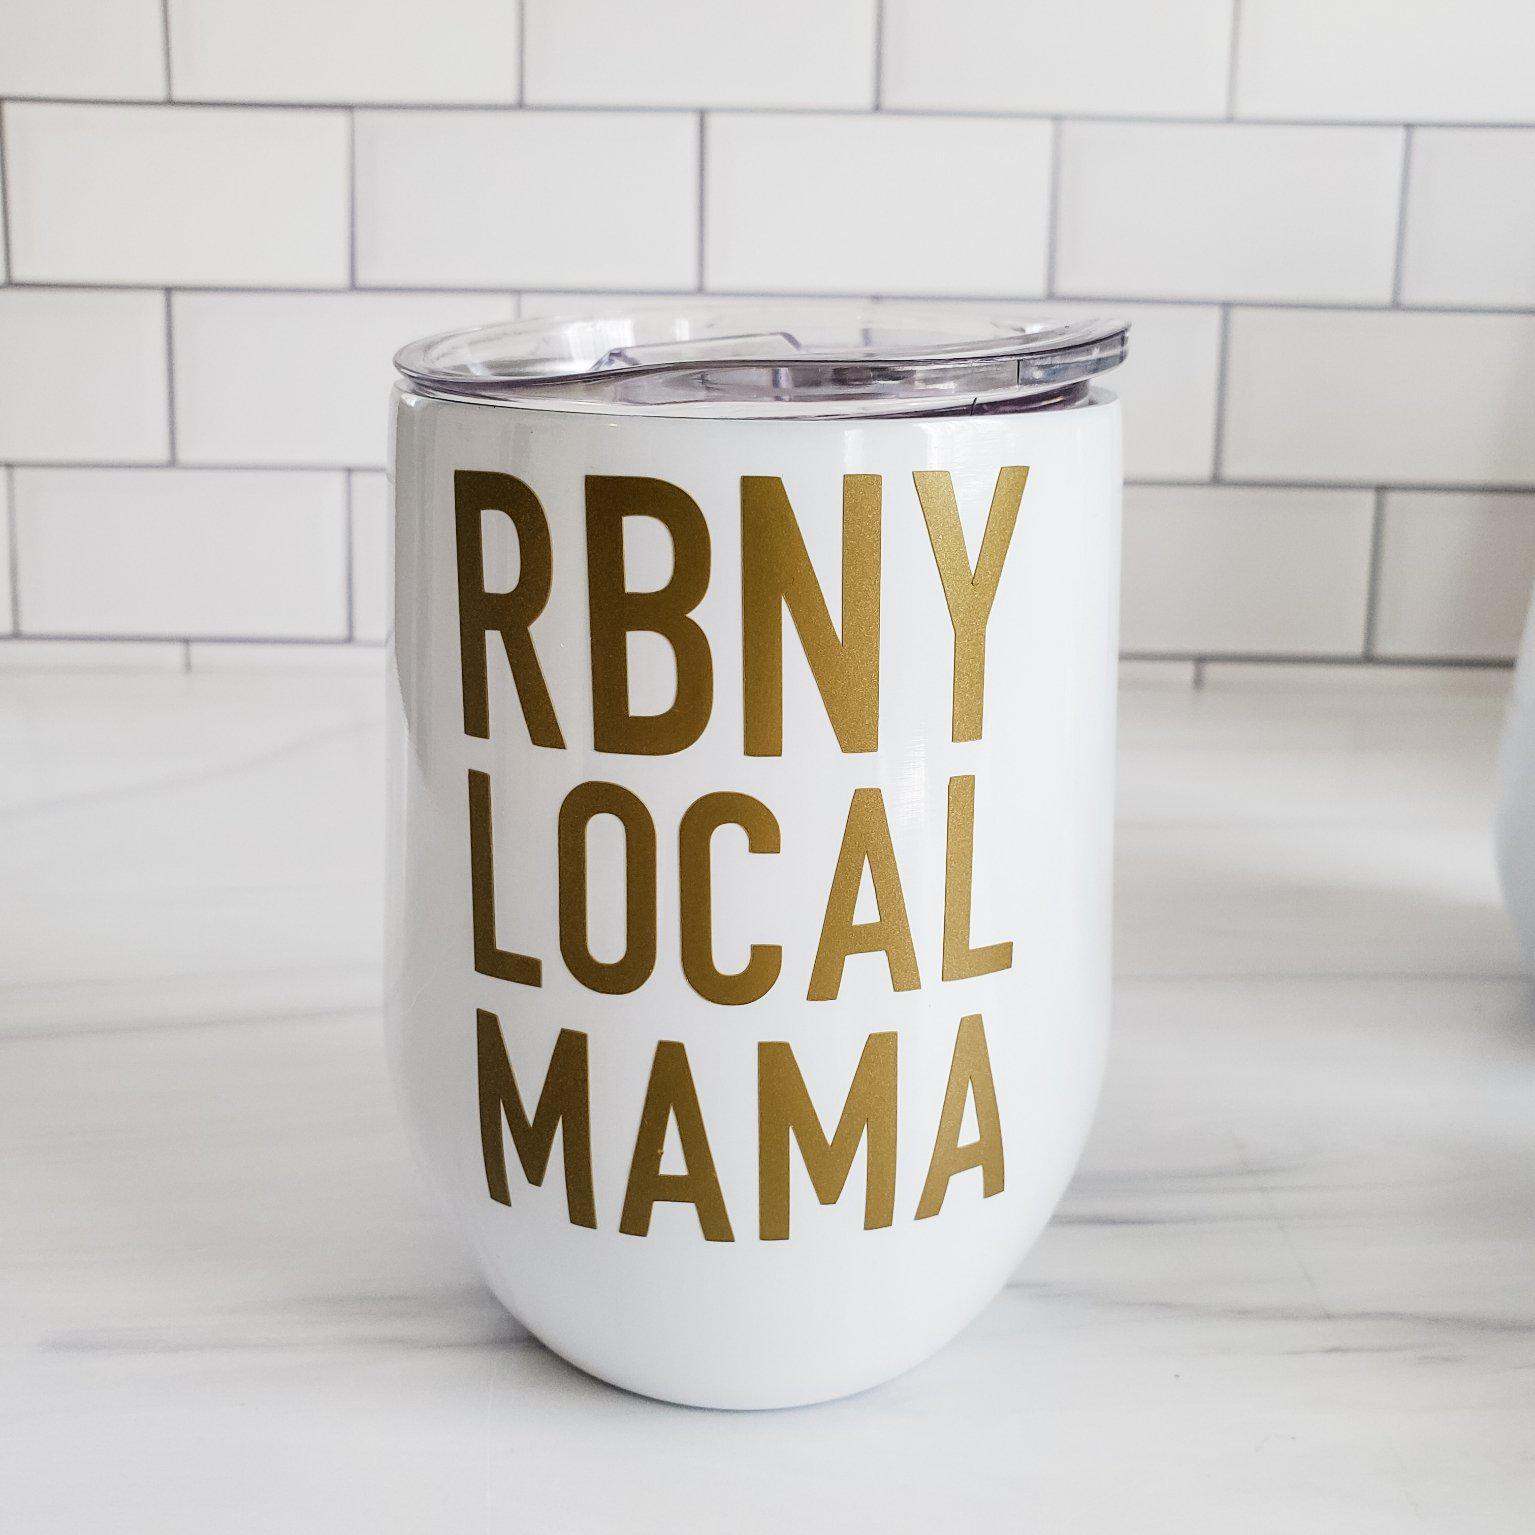 RBNY Local Mama Insulated Outdoor Wine Tumbler Salt and Sparkle